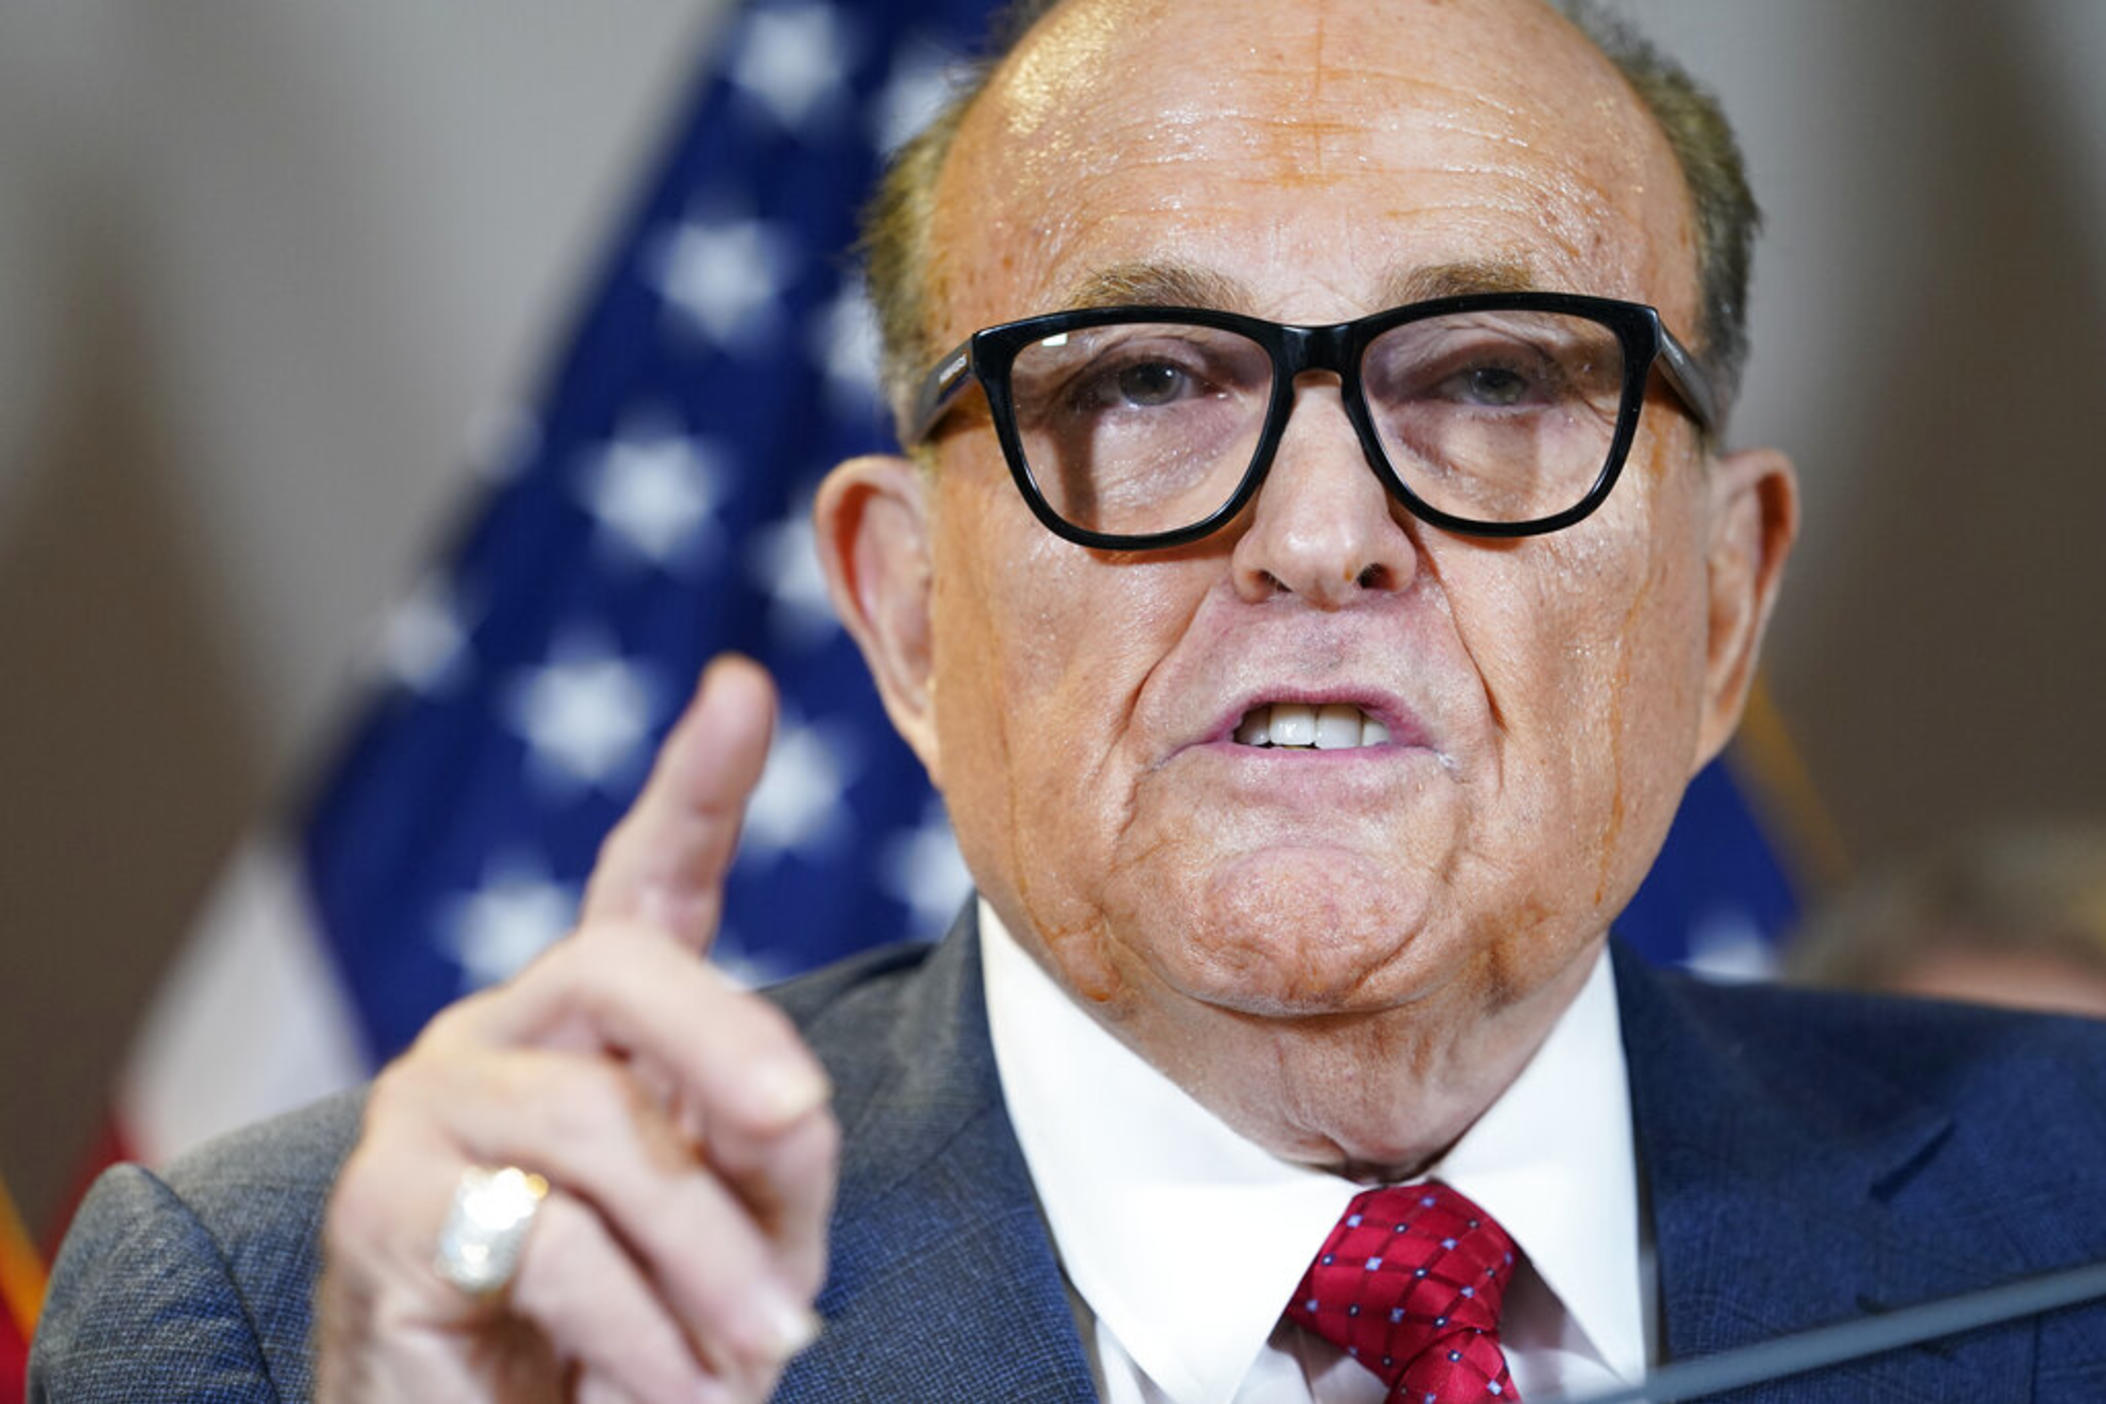 Former New York Mayor Rudy Giuliani, a lawyer for President Donald Trump, speaks during a news conference at the Republican National Committee headquarters, Nov. 19, 2020, in Washington. A lawyer for Giuliani says he will not appear as scheduled Tuesday, Aug. 9, 2022, before a special grand jury in Atlanta that's investigating whether former President Donald Trump and others illegally tried to interfere in the 2020 general election in Georgia.